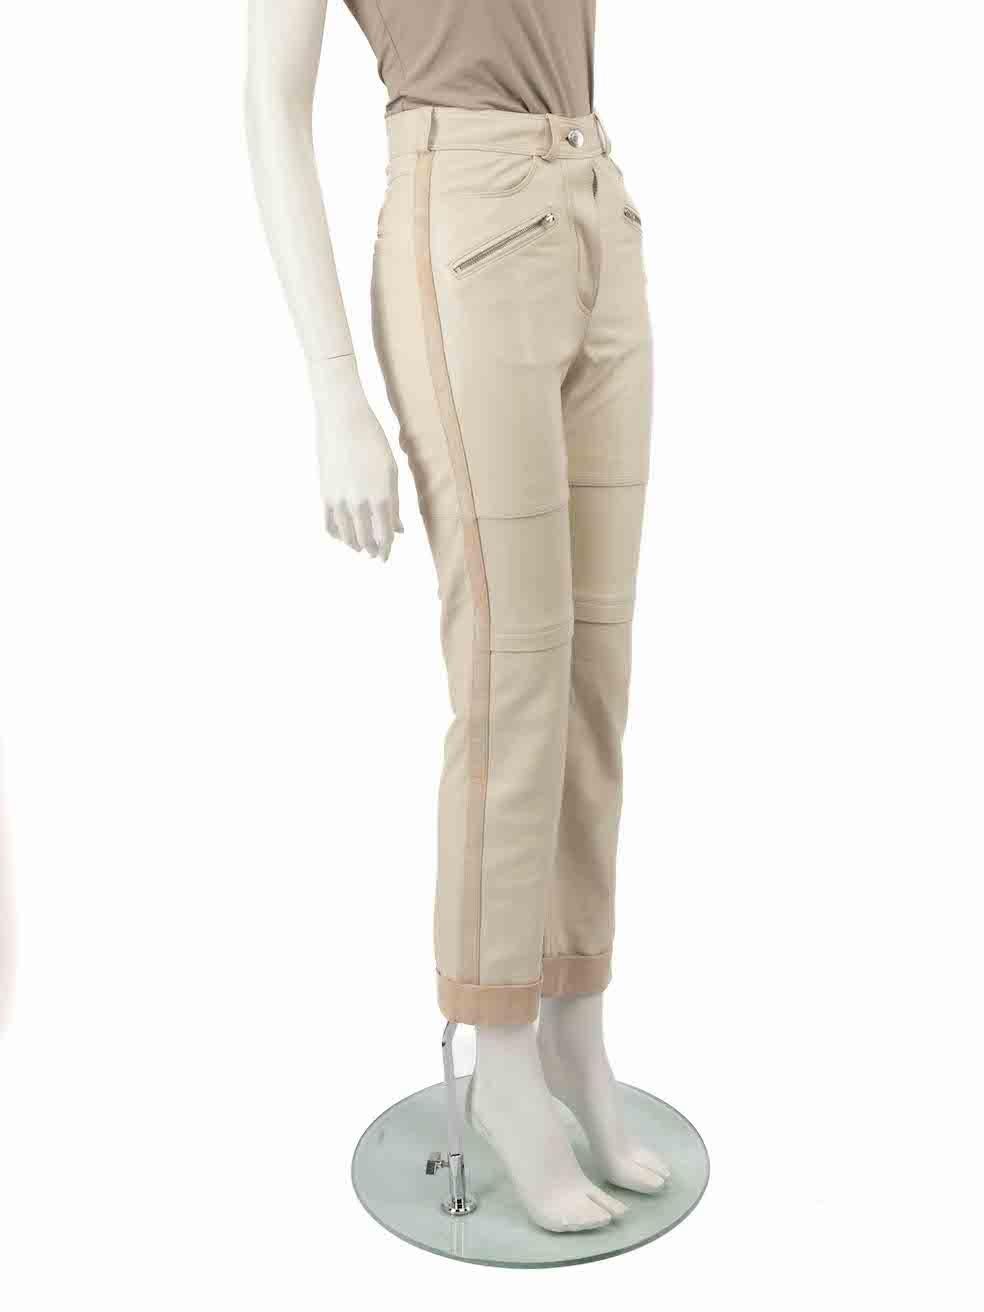 CONDITION is Very good. Hardly any visible wear to trousers is evident on this used Iro designer resale item.
 
 
 
 Details
 
 
 Ecru
 
 Leather
 
 Trousers
 
 Slim fit
 
 Mid rise
 
 4x Front pockets
 
 2x Back pockets
 
 Fly zip and button